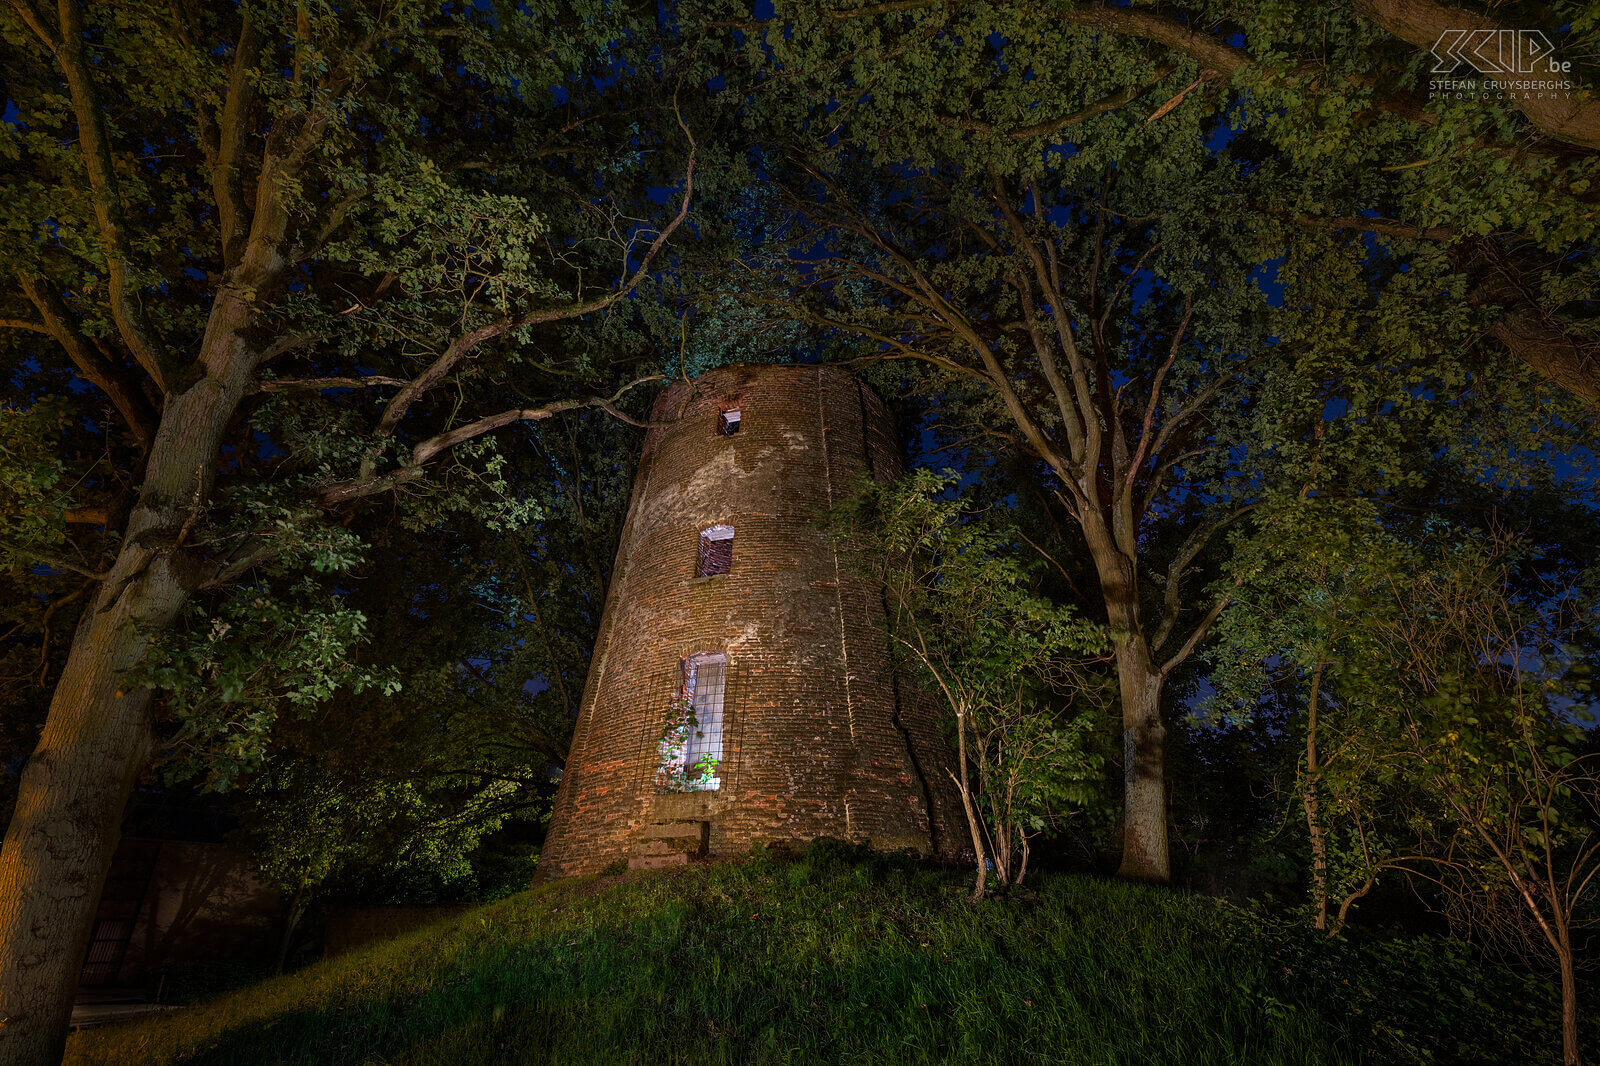 Hageland by night - Mill in Engsbergsen in Tessenderlo The mill in Engsbergsen in Tessenderlo was a grain mill that was built in 1826. The mill has not been in use since 1934 and is now a ruin that stands among the trees in a residential area. The windmill is no longer photogenic at all and yet I tried to make a few atmospheric images of it in the evening with a few flashes and LED lamps. Stefan Cruysberghs